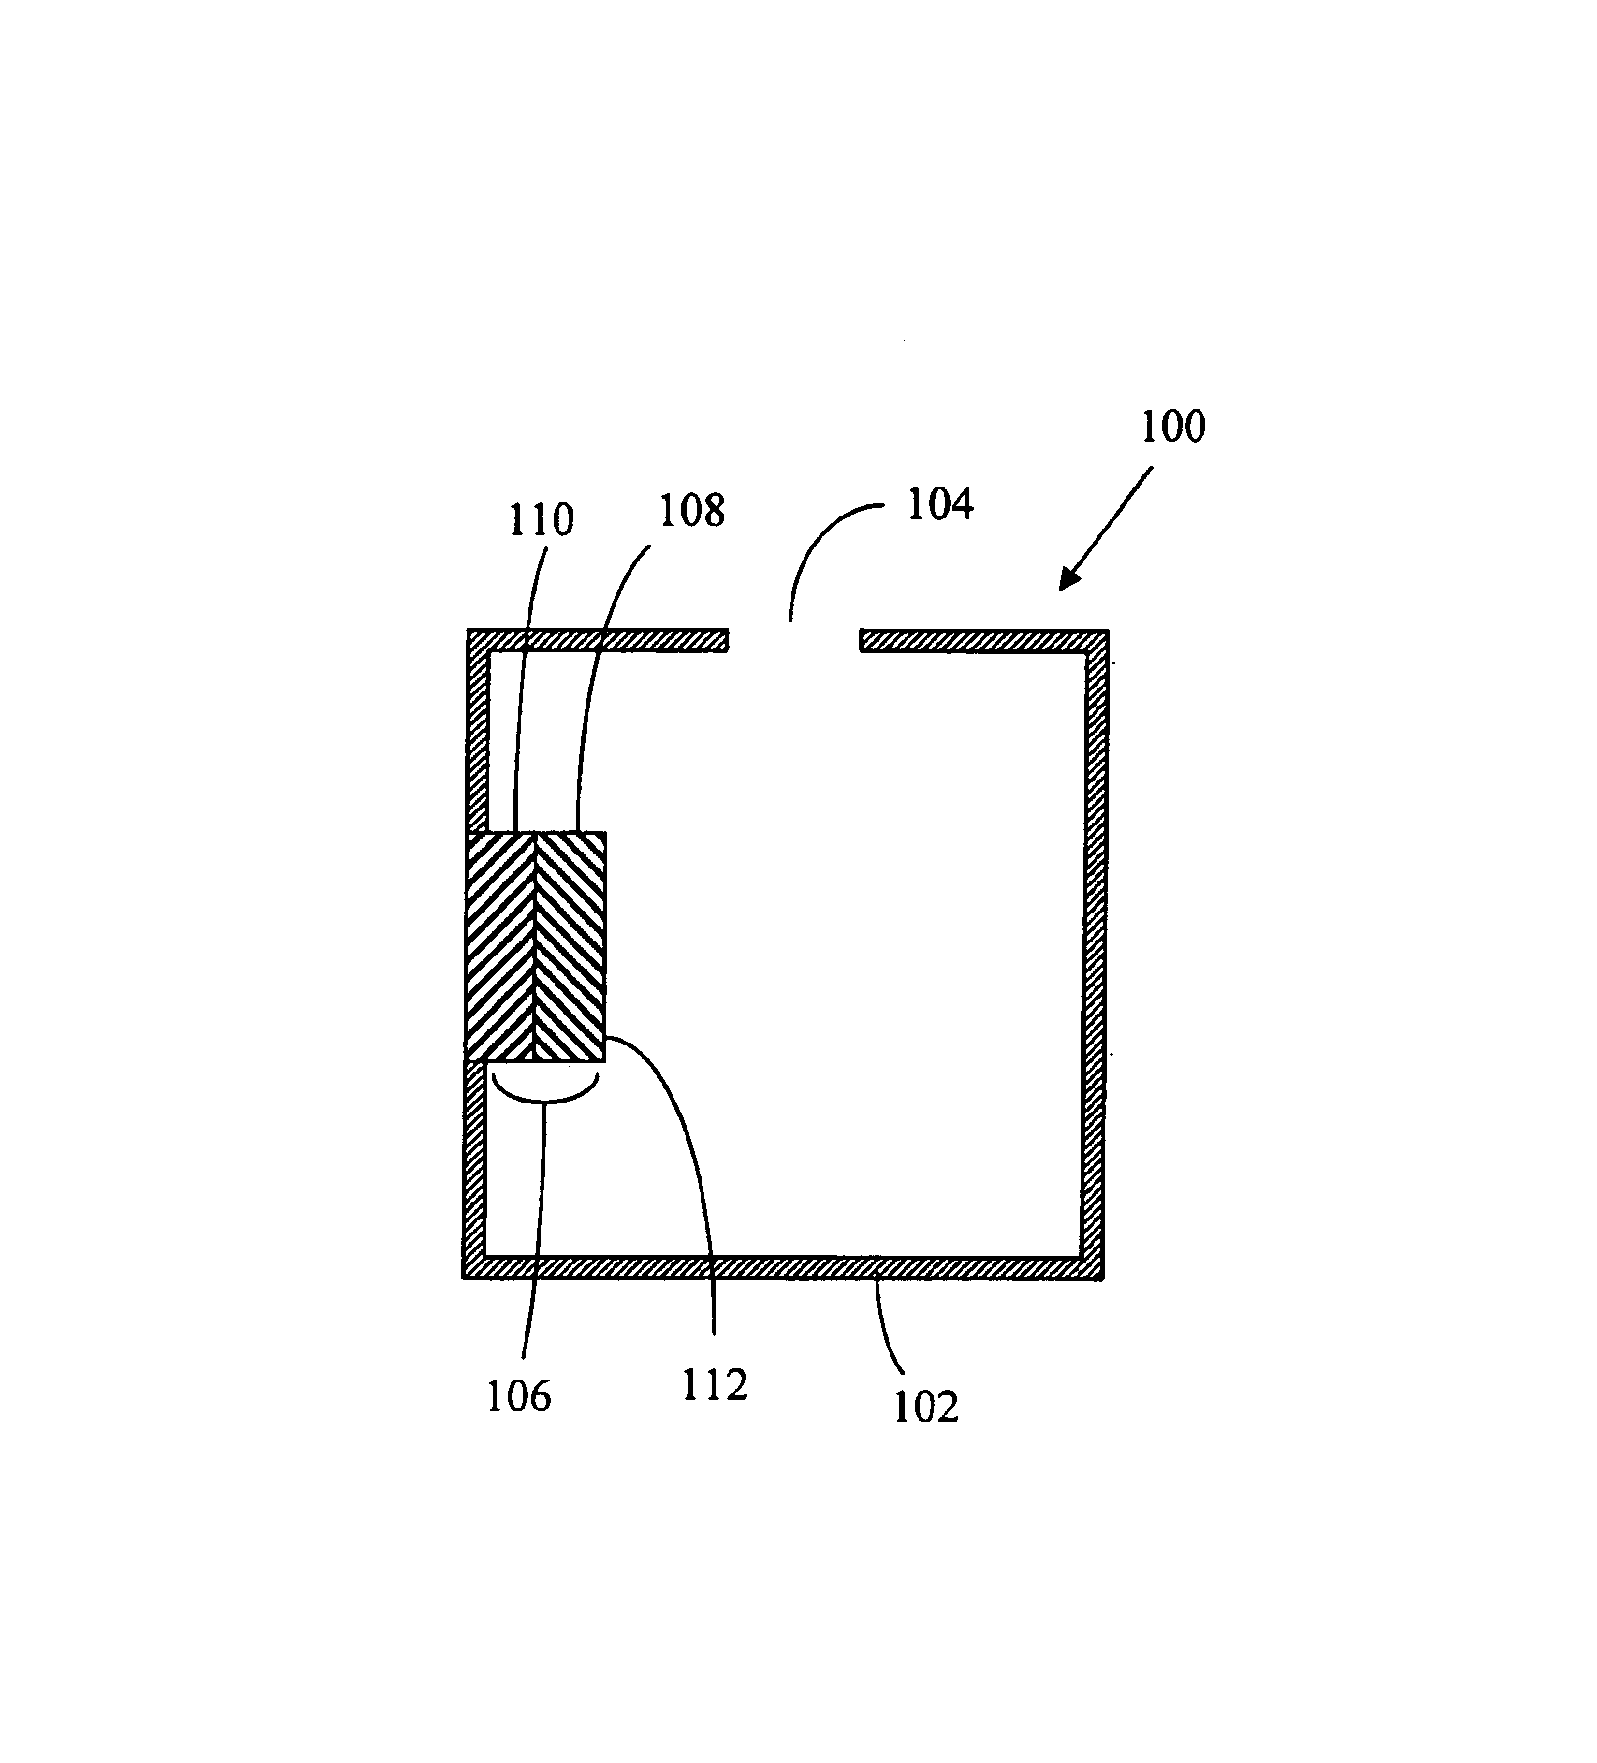 Projection display systems utilizing light emitting diodes and light recycling